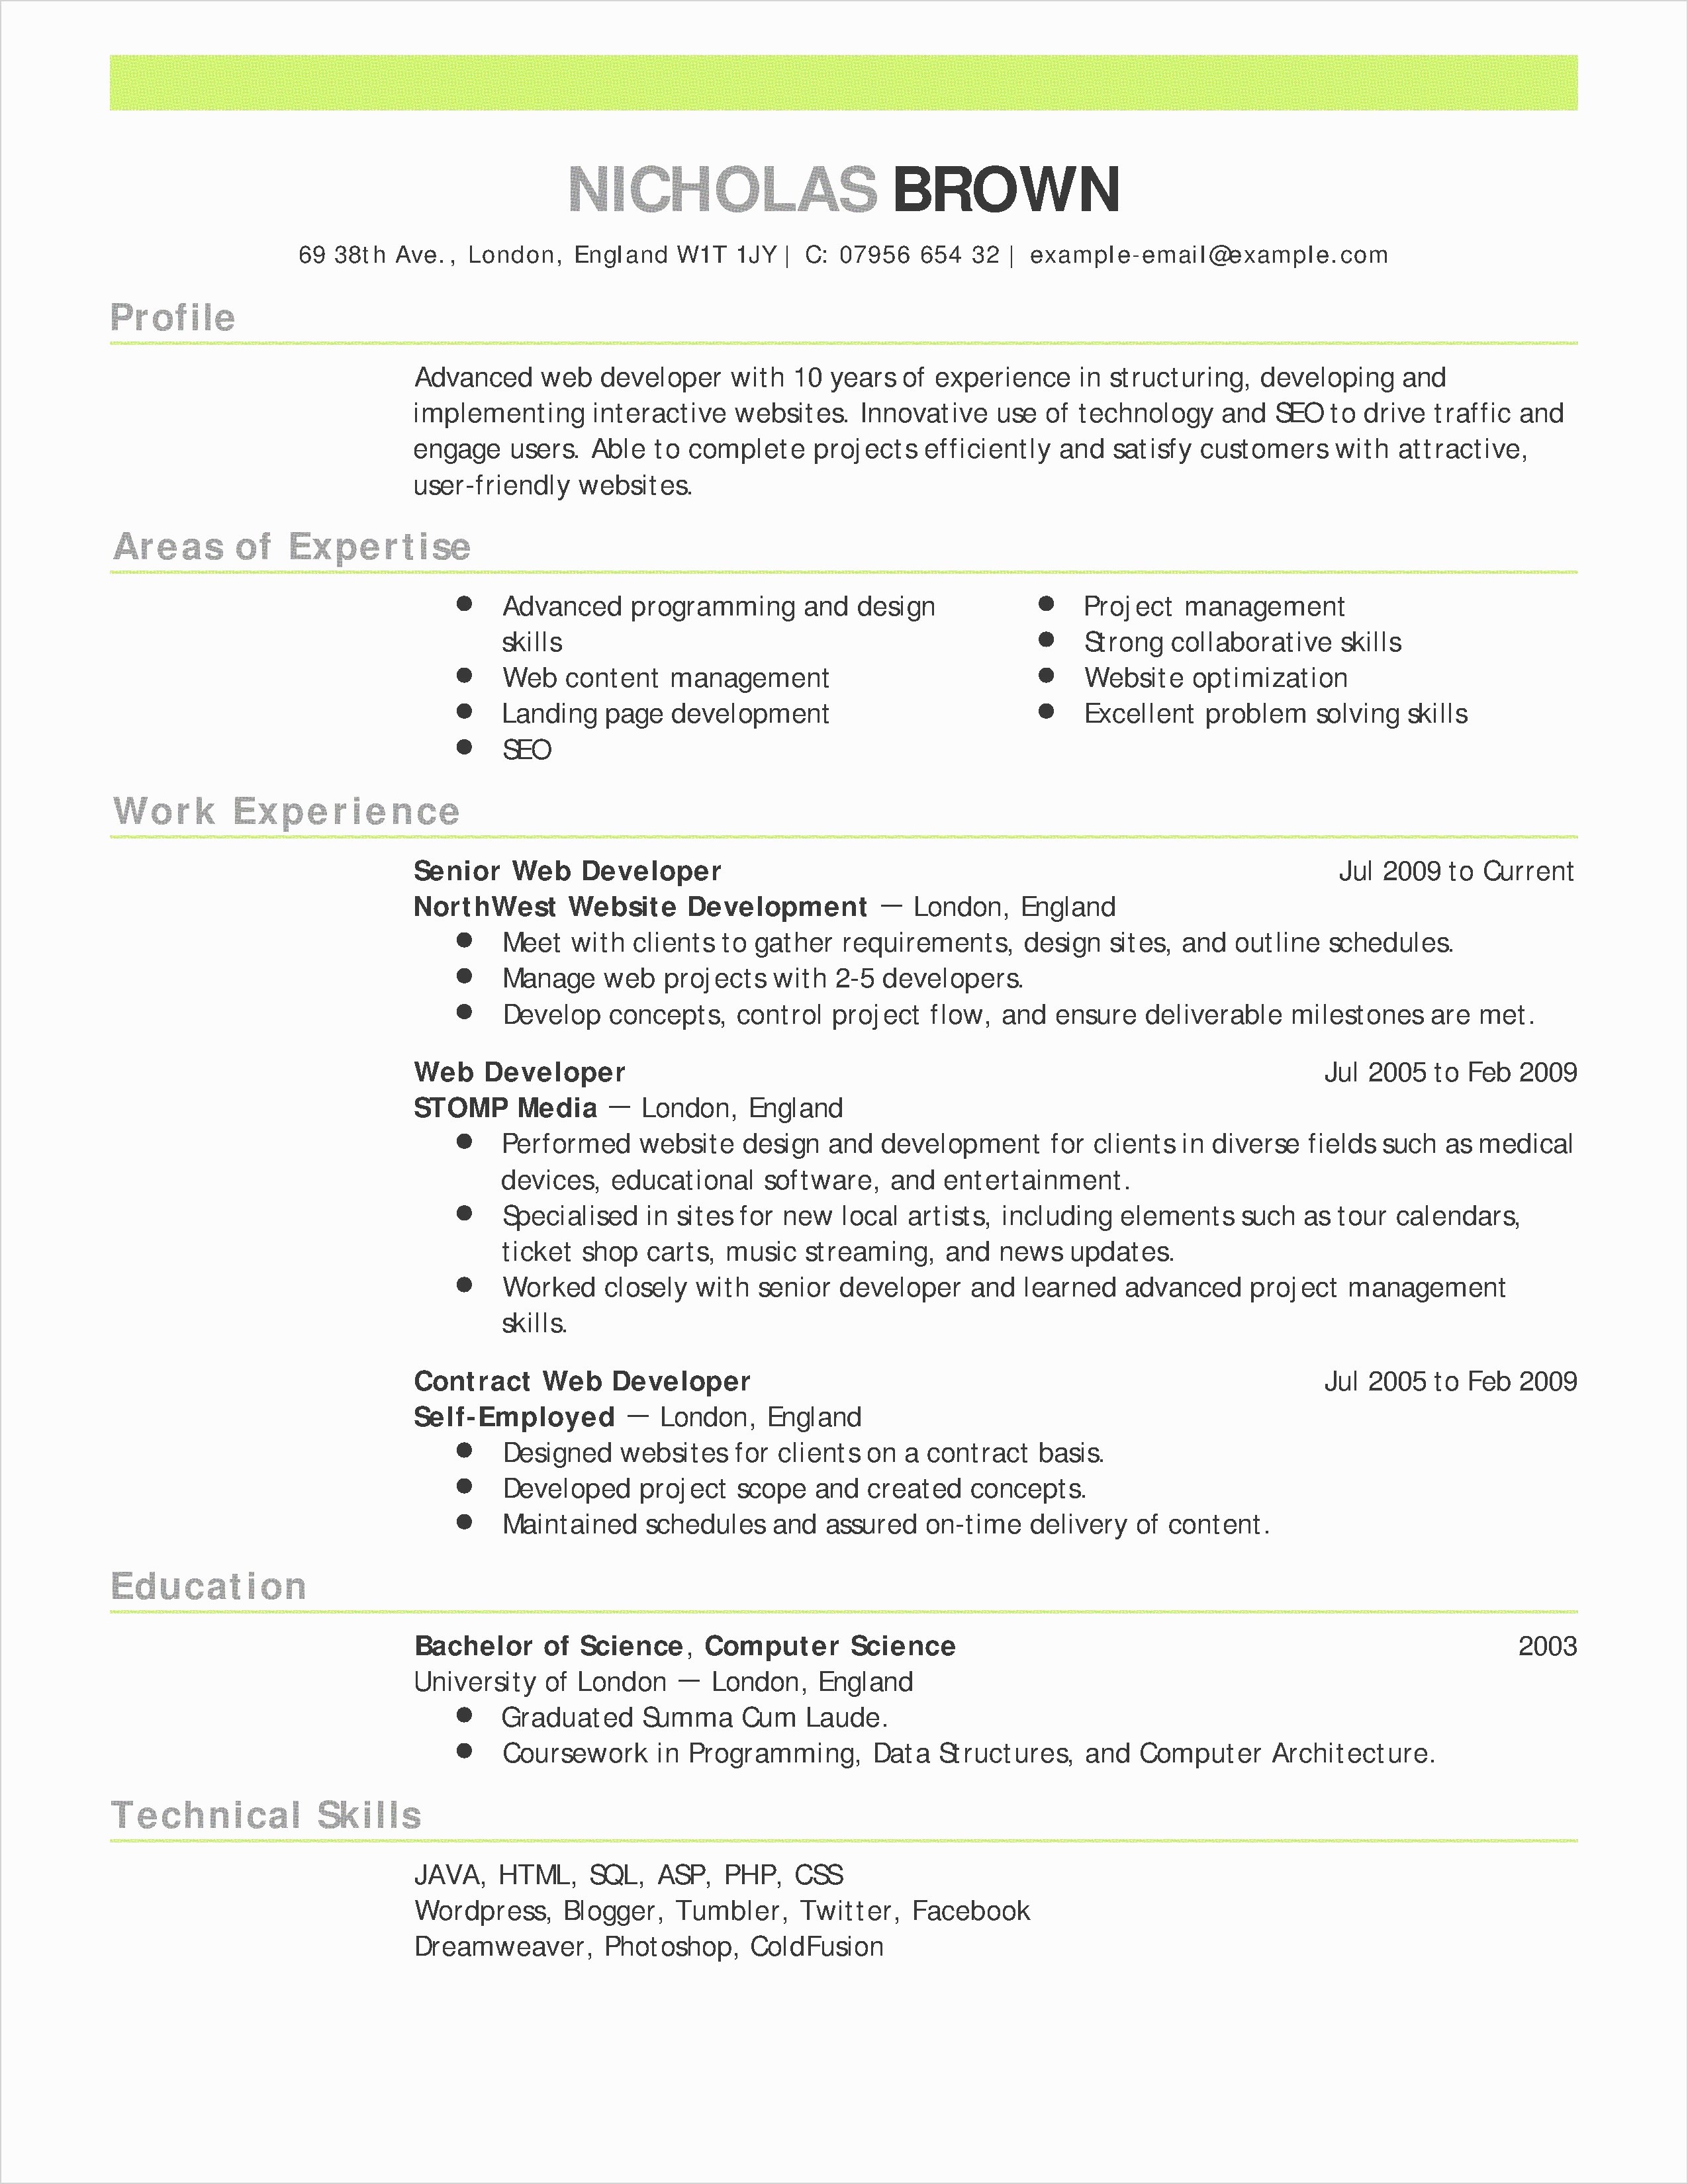 High School Resume College Resume Templates For Student Template Stockportcountytrust Application Word High School Examples high school resume|wikiresume.com